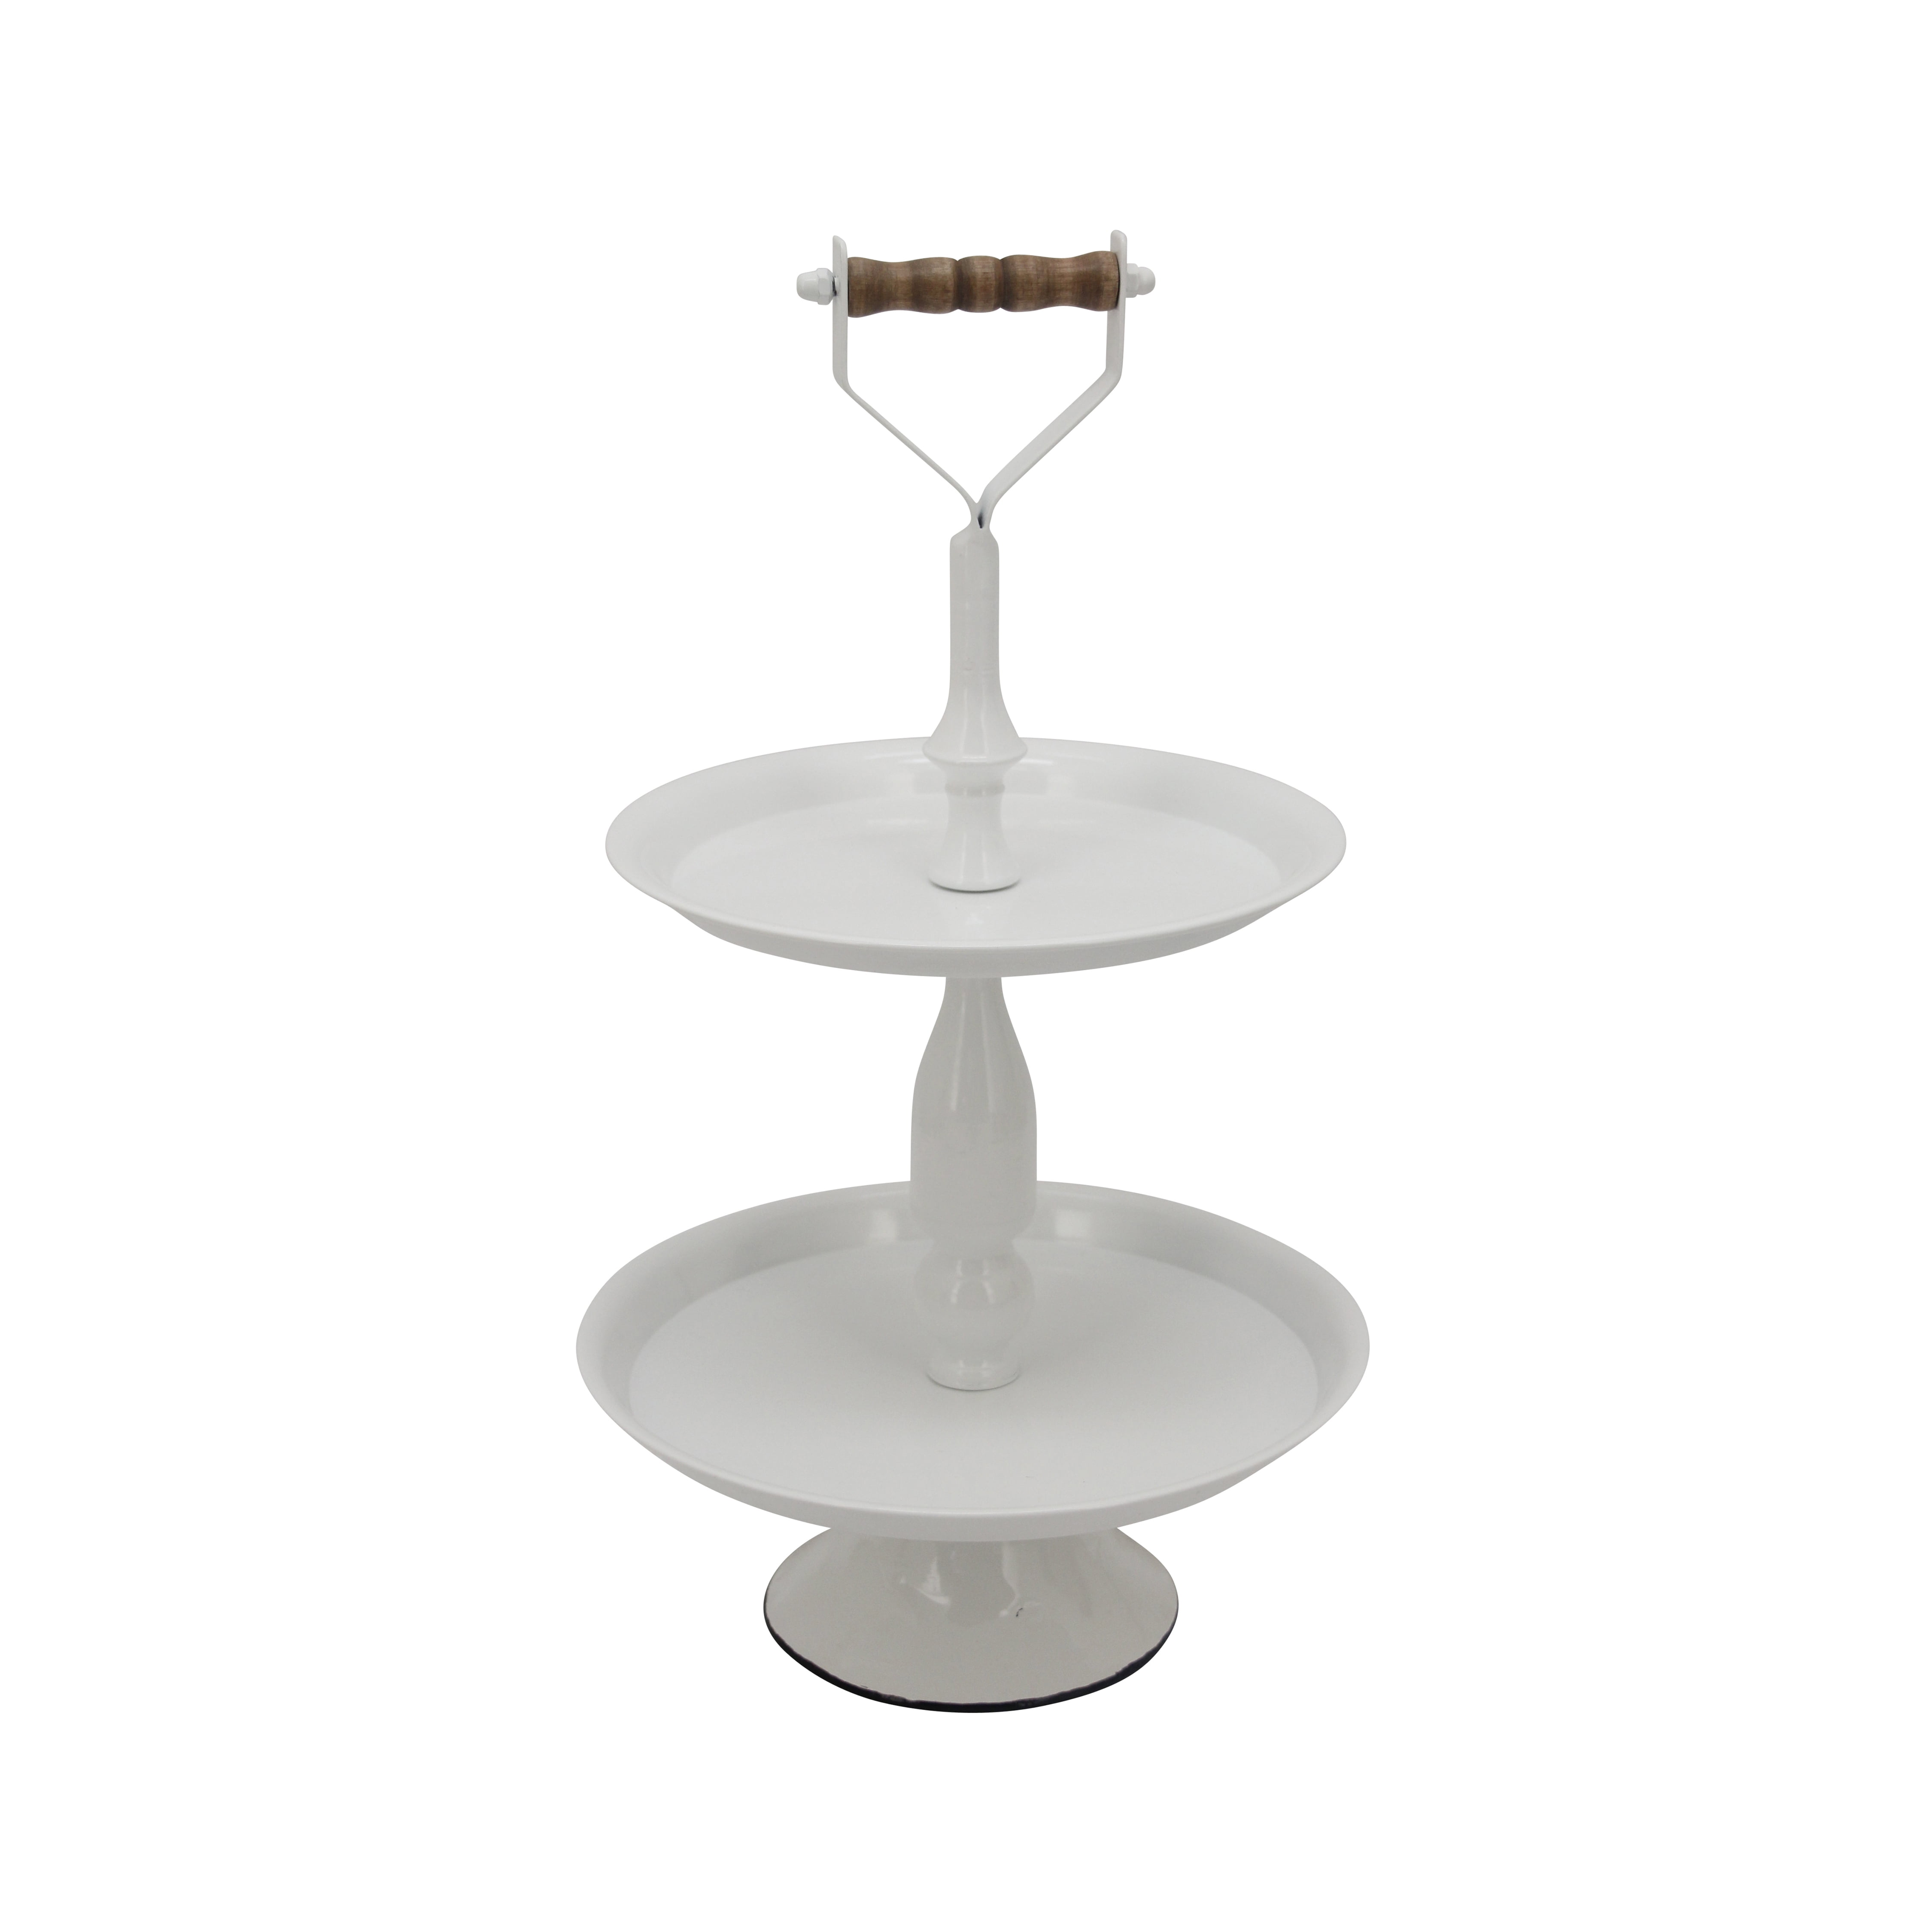 Metal Constructed Two-Tiered Round Serving Tray, White - Walmart.com ...